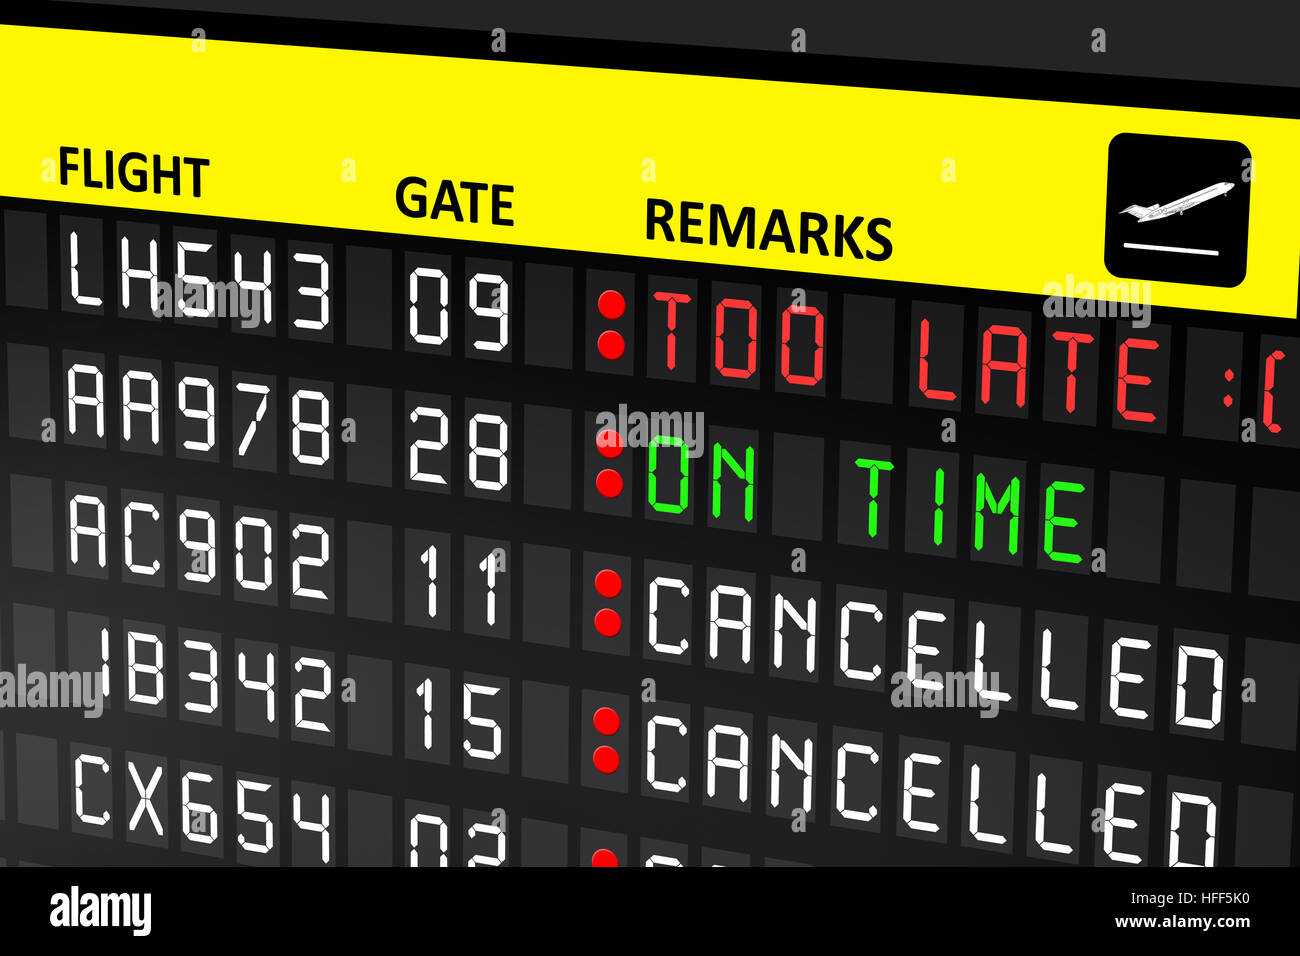 Flight delayed or cancelled display panel in airport Stock Photo